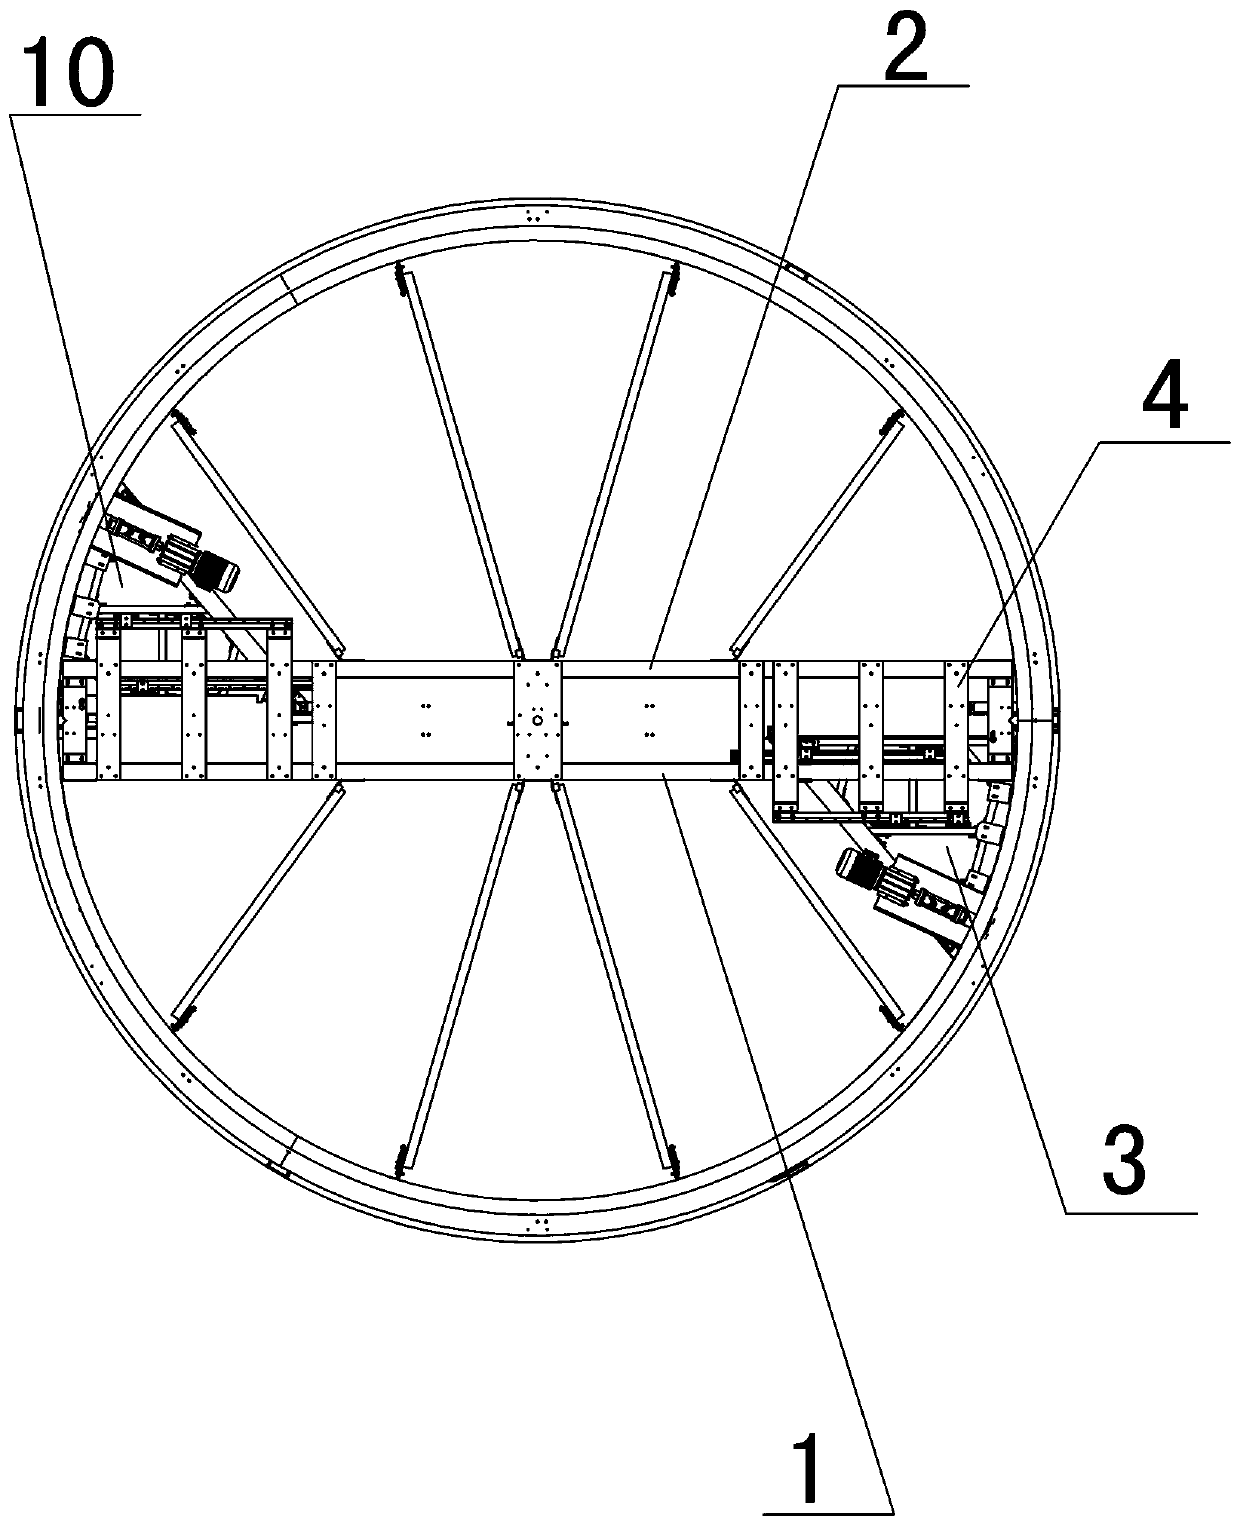 Revolving door structure with slidable display boxes